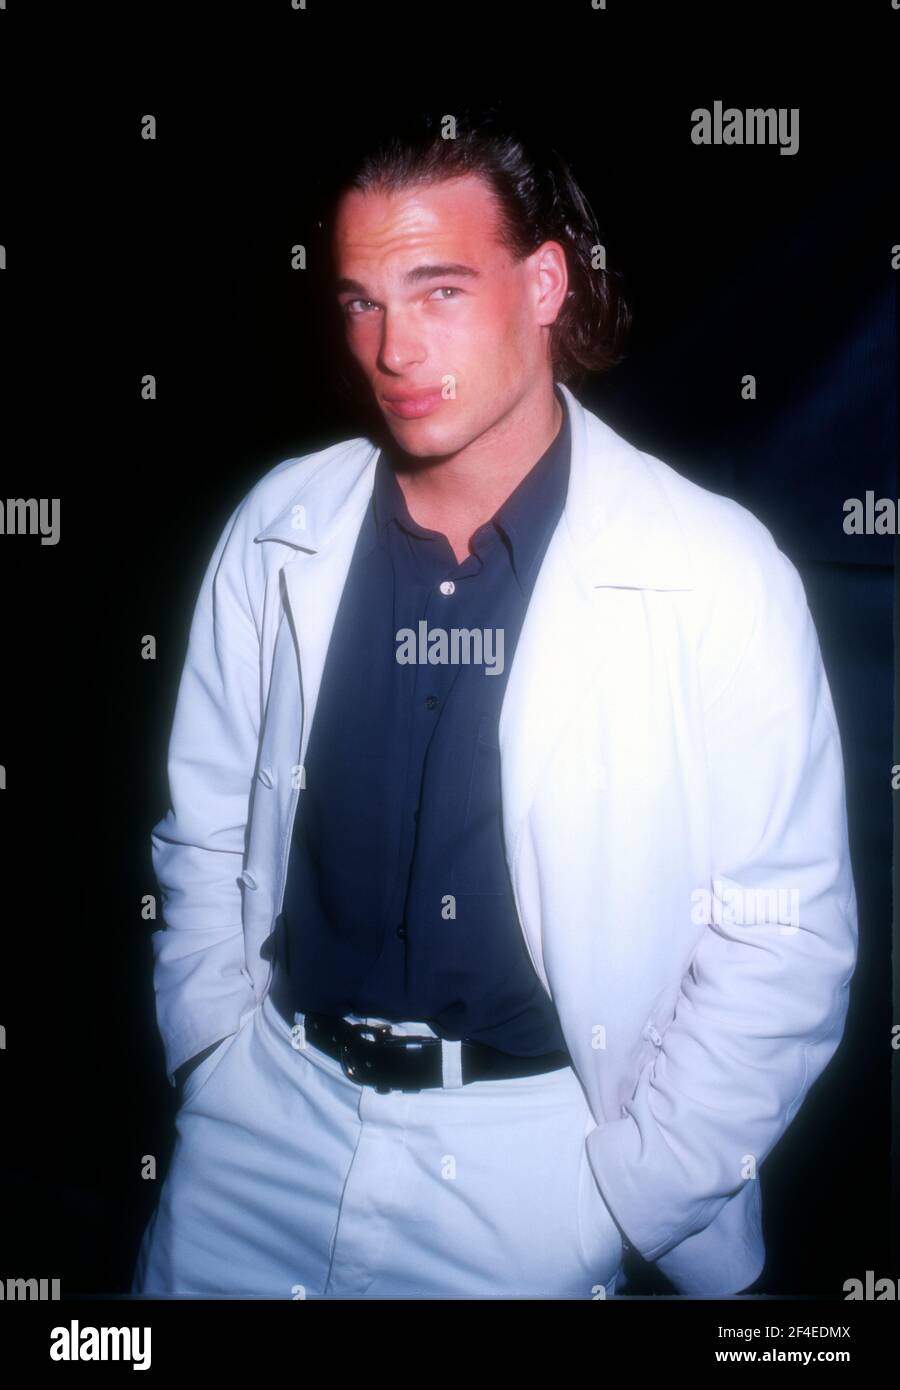 Hollywood, California, USA 16th May 1996 Model Joel West attends The Samuel  Goldwyn Company's 'I Shot Andy Warhol' Premiere on May 16, 1996 at Cinerama  Dome in Hollywood, California, USA. Photo by